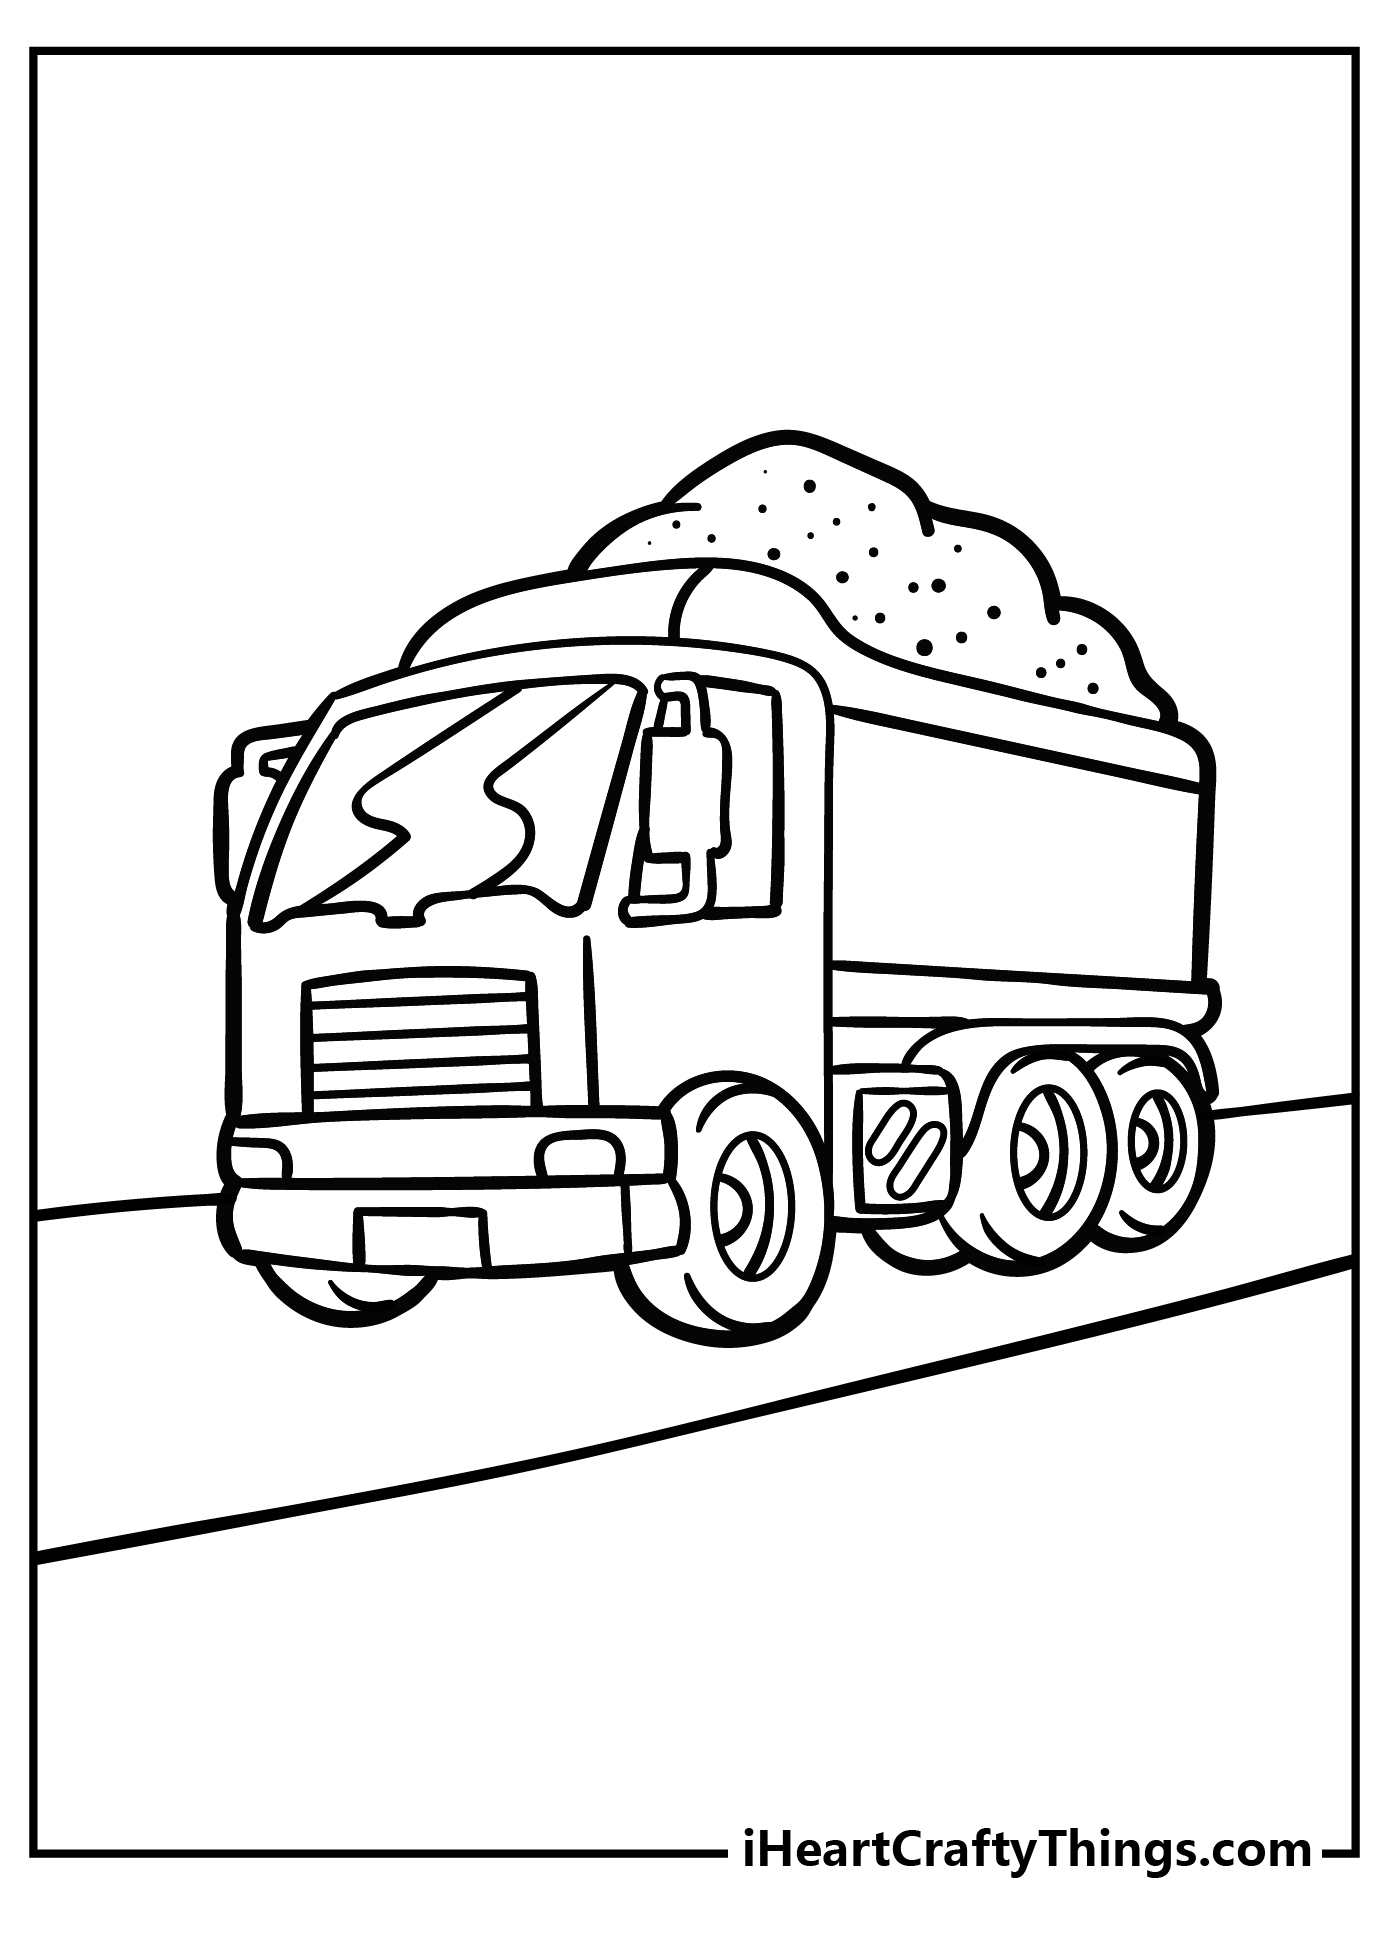 Dump Truck Coloring Pages for adults free printable